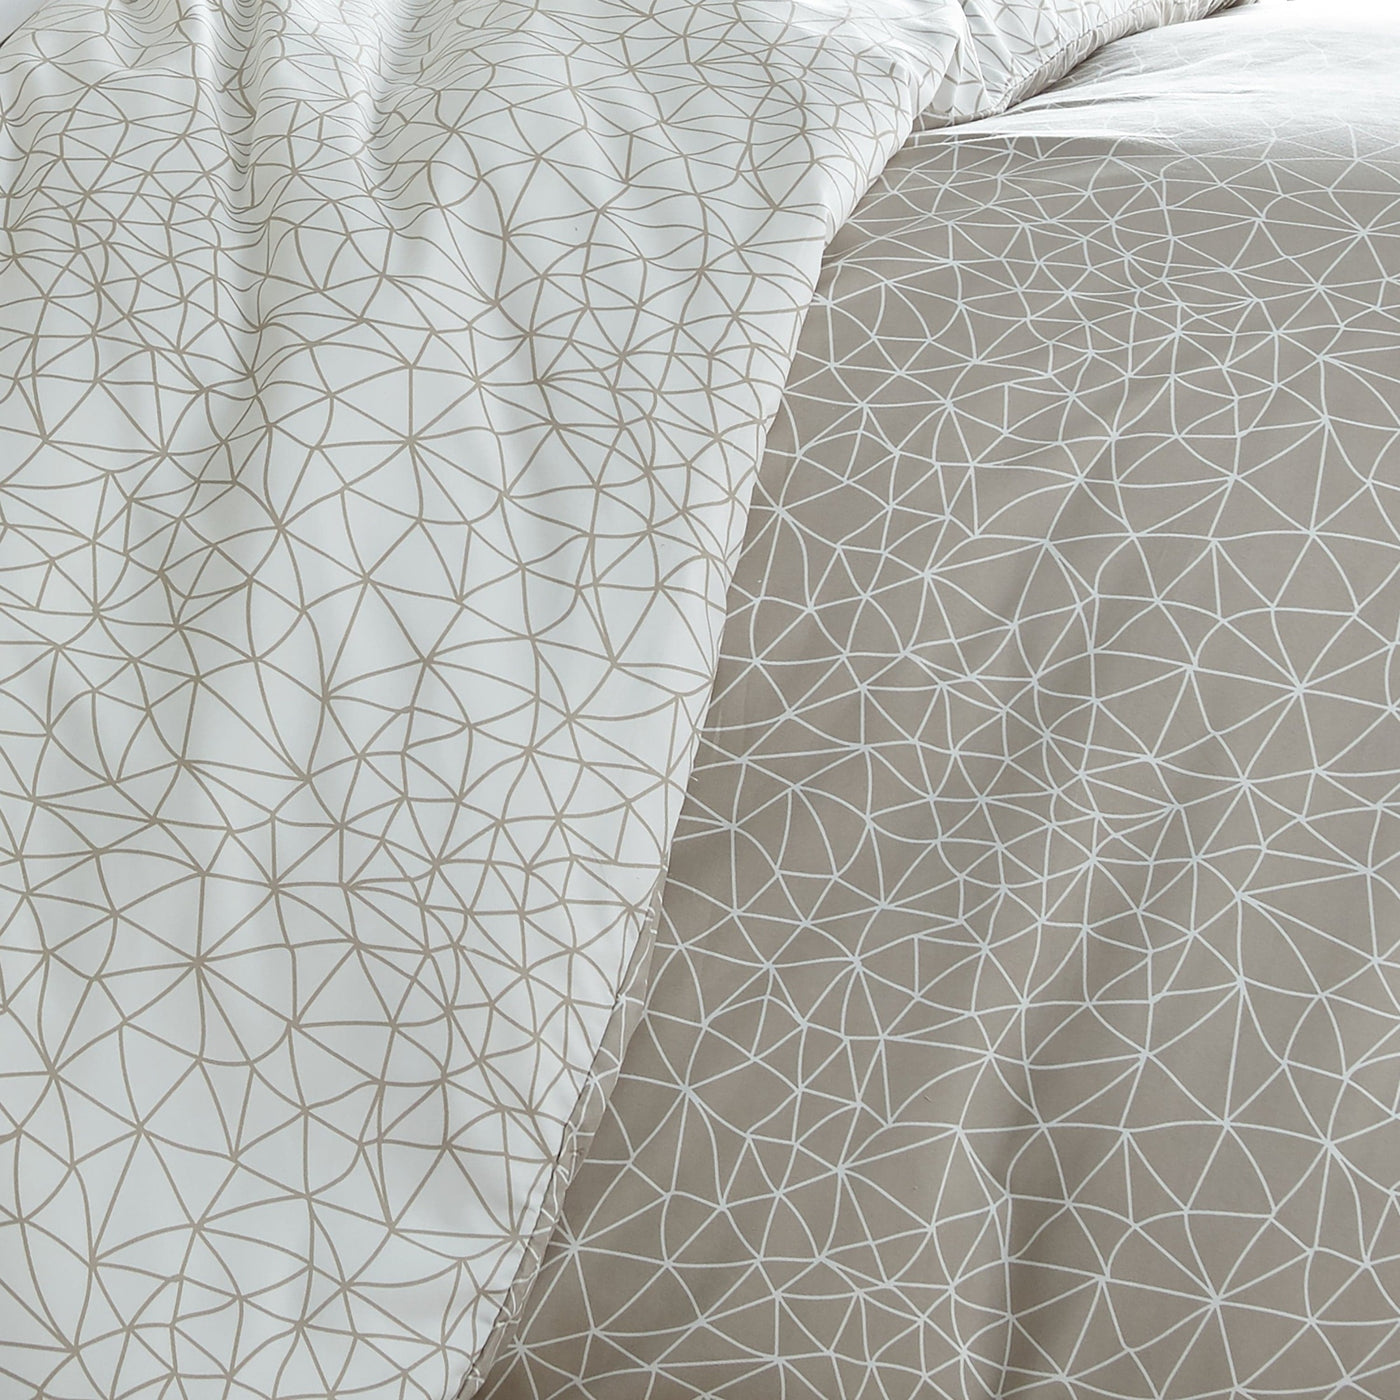 Details and Print Pattern of Geometric Maze Reversible Duvet Cover Set in Taupe#color_geometric-maze-taupe